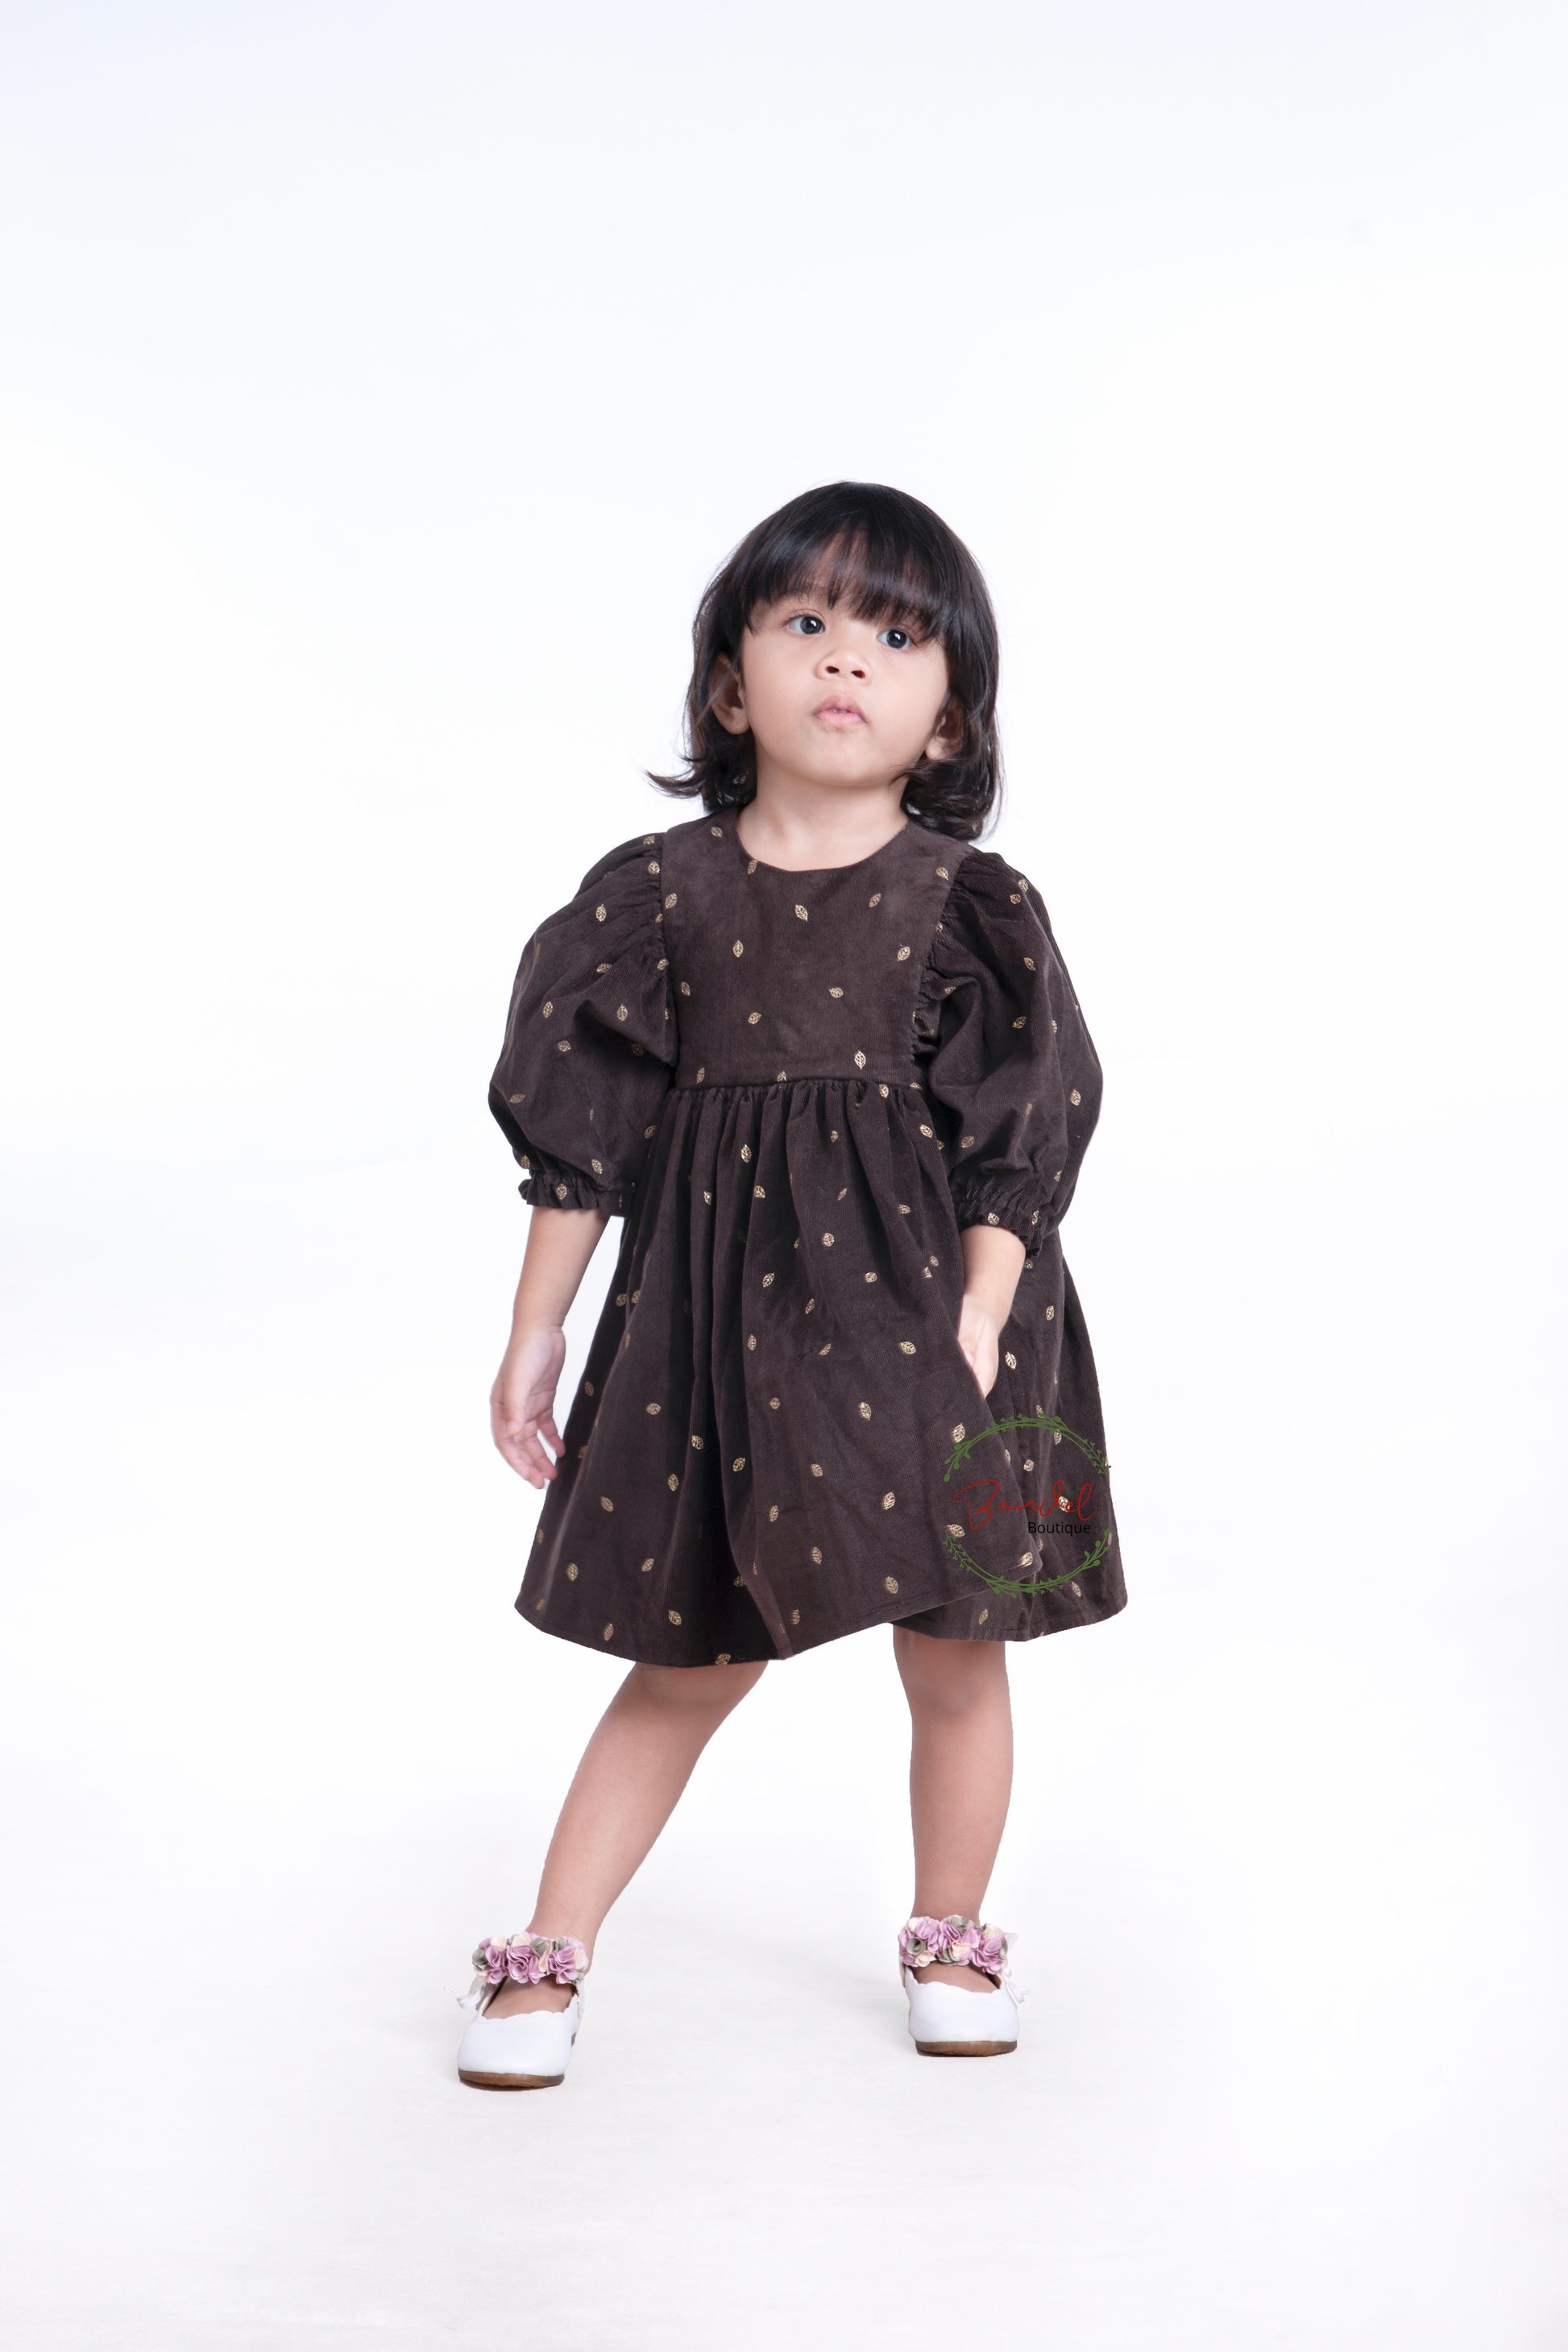 3/4 Sleeves Corduroy Girl Dress Crafted with a luxurious corduroy fabric featuring gold leafs prints and classic styling, this whimsical dress is finished with a ruffled hem, 3/4 length sleeves, and a wooden button closure at the back bodice.